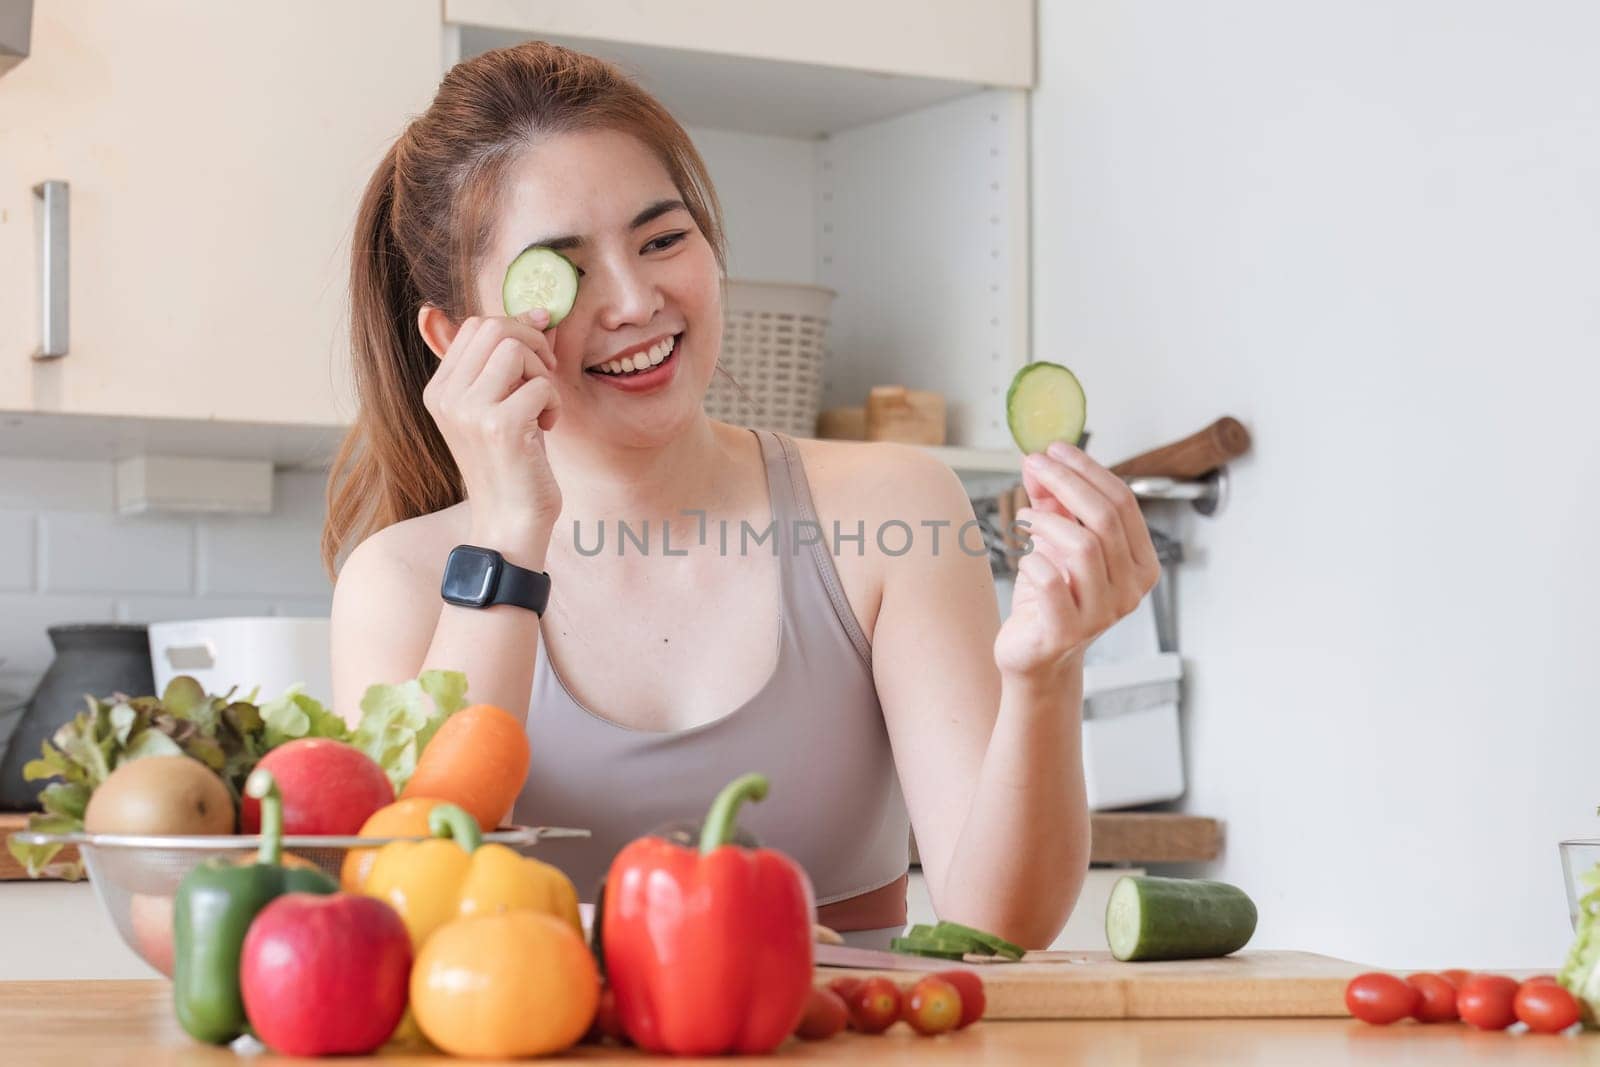 Sporty young woman is preparing healthy food on light kitchen. healthy food concept..